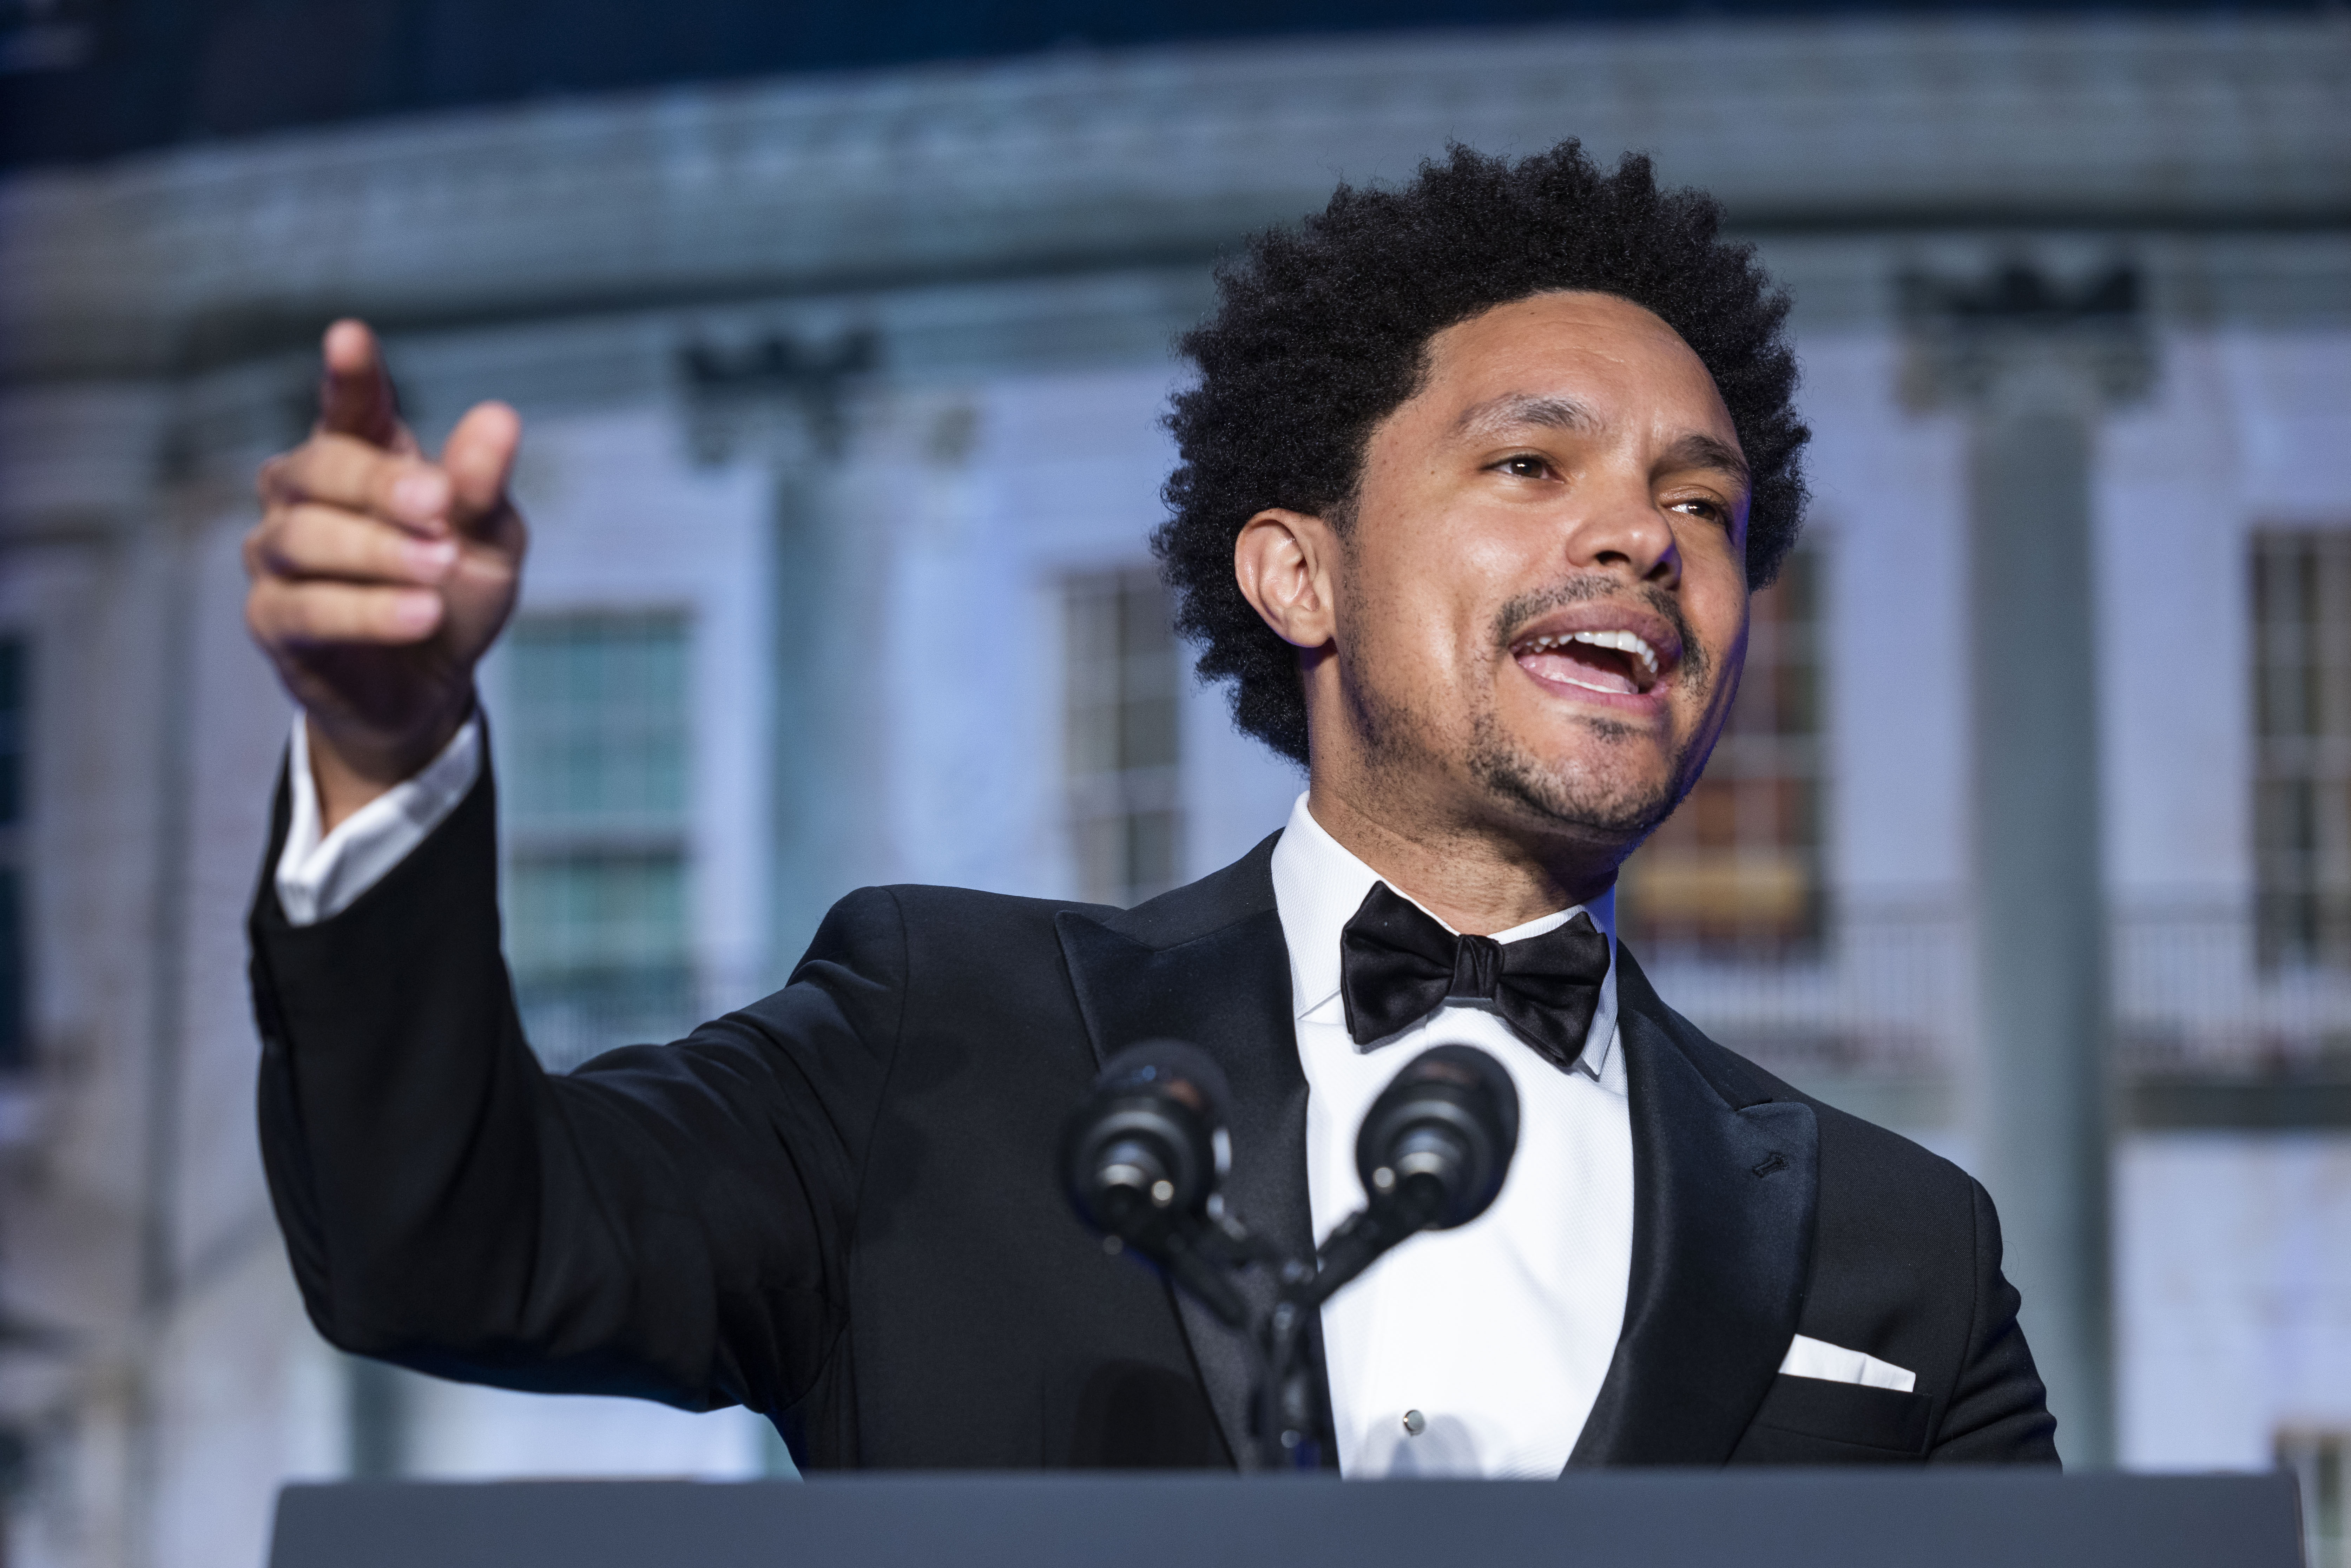 Trevor Noah, host of "The Daily Show" on Comedy Central, speaks during the White House Correspondents' Association (WHCA) dinner in Washington, D.C., U.S., on Saturday, April 30, 2022. | Source: Getty Images